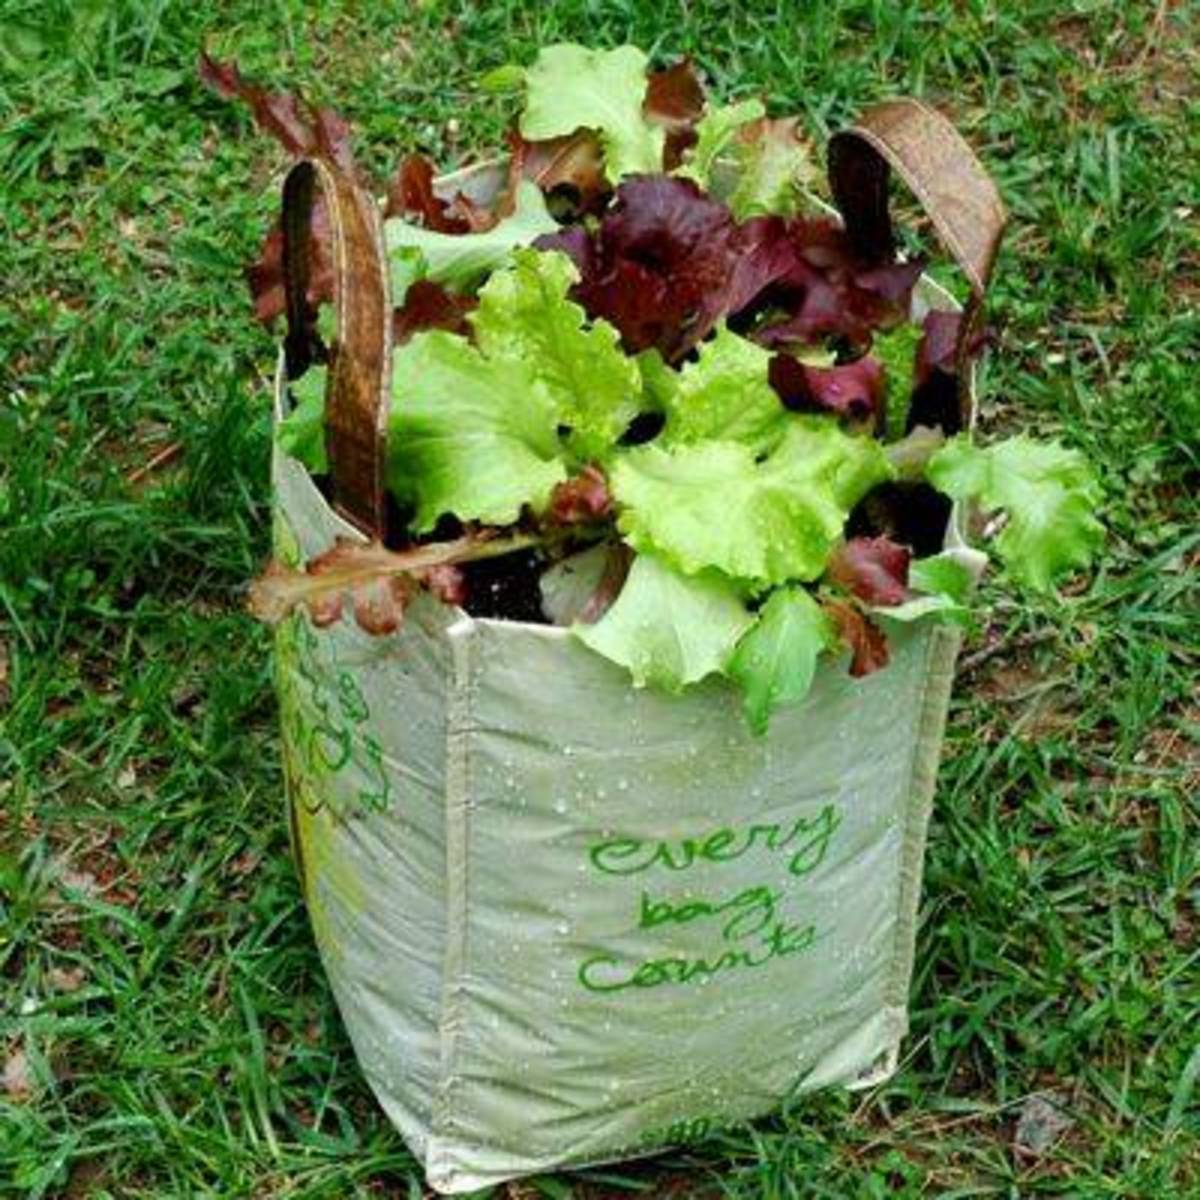 Gardening with grocery bags.